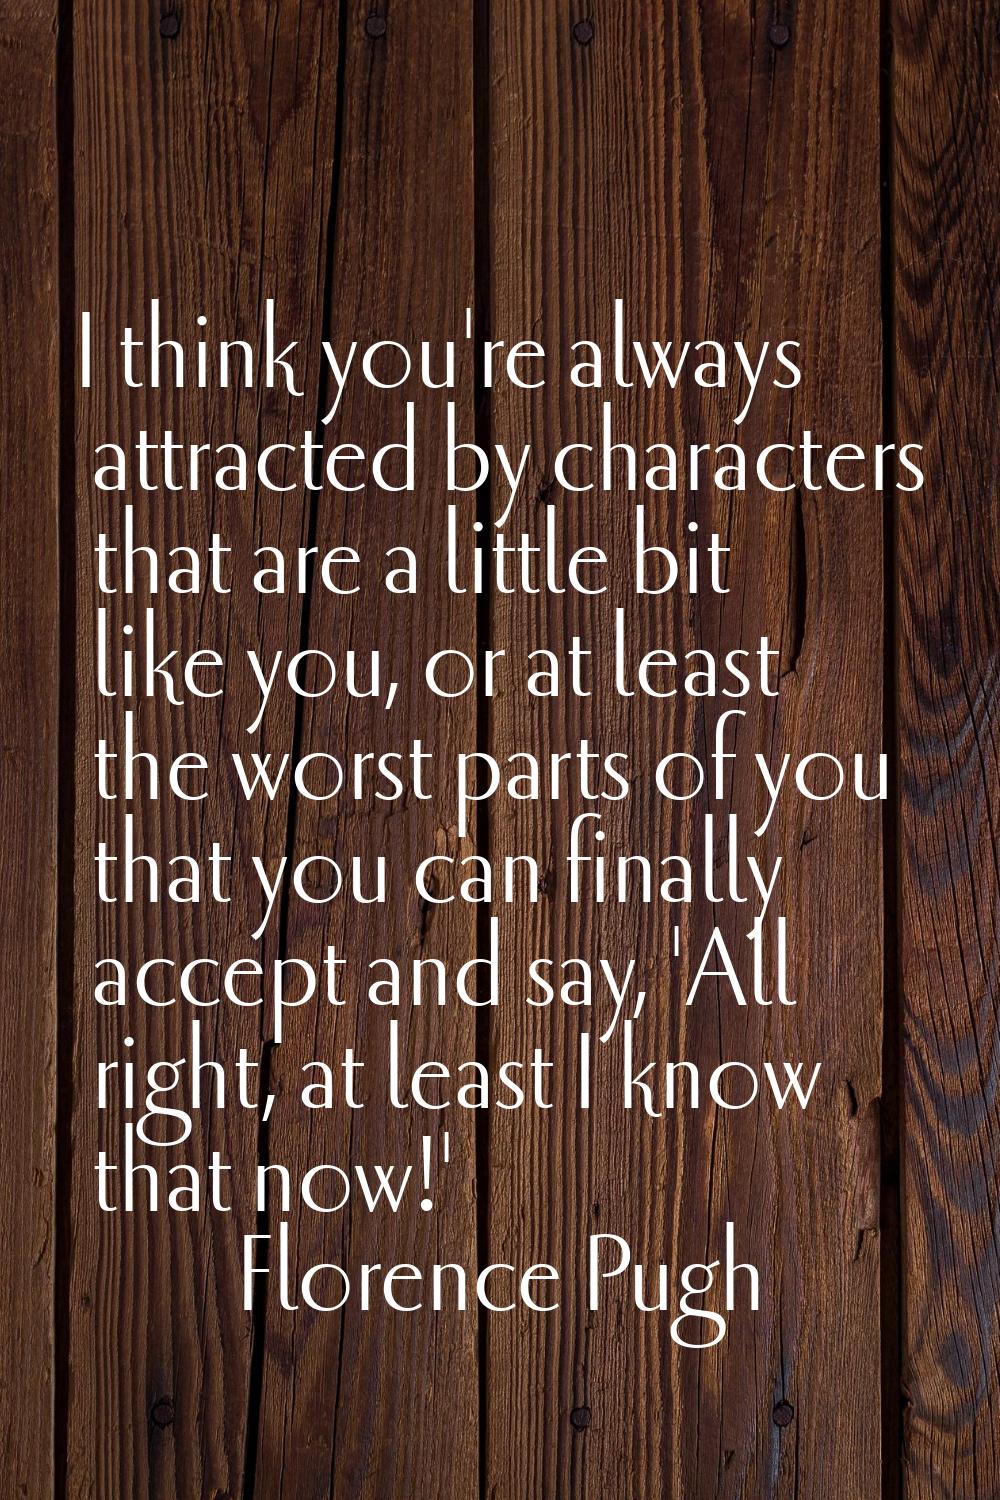 I think you're always attracted by characters that are a little bit like you, or at least the worst